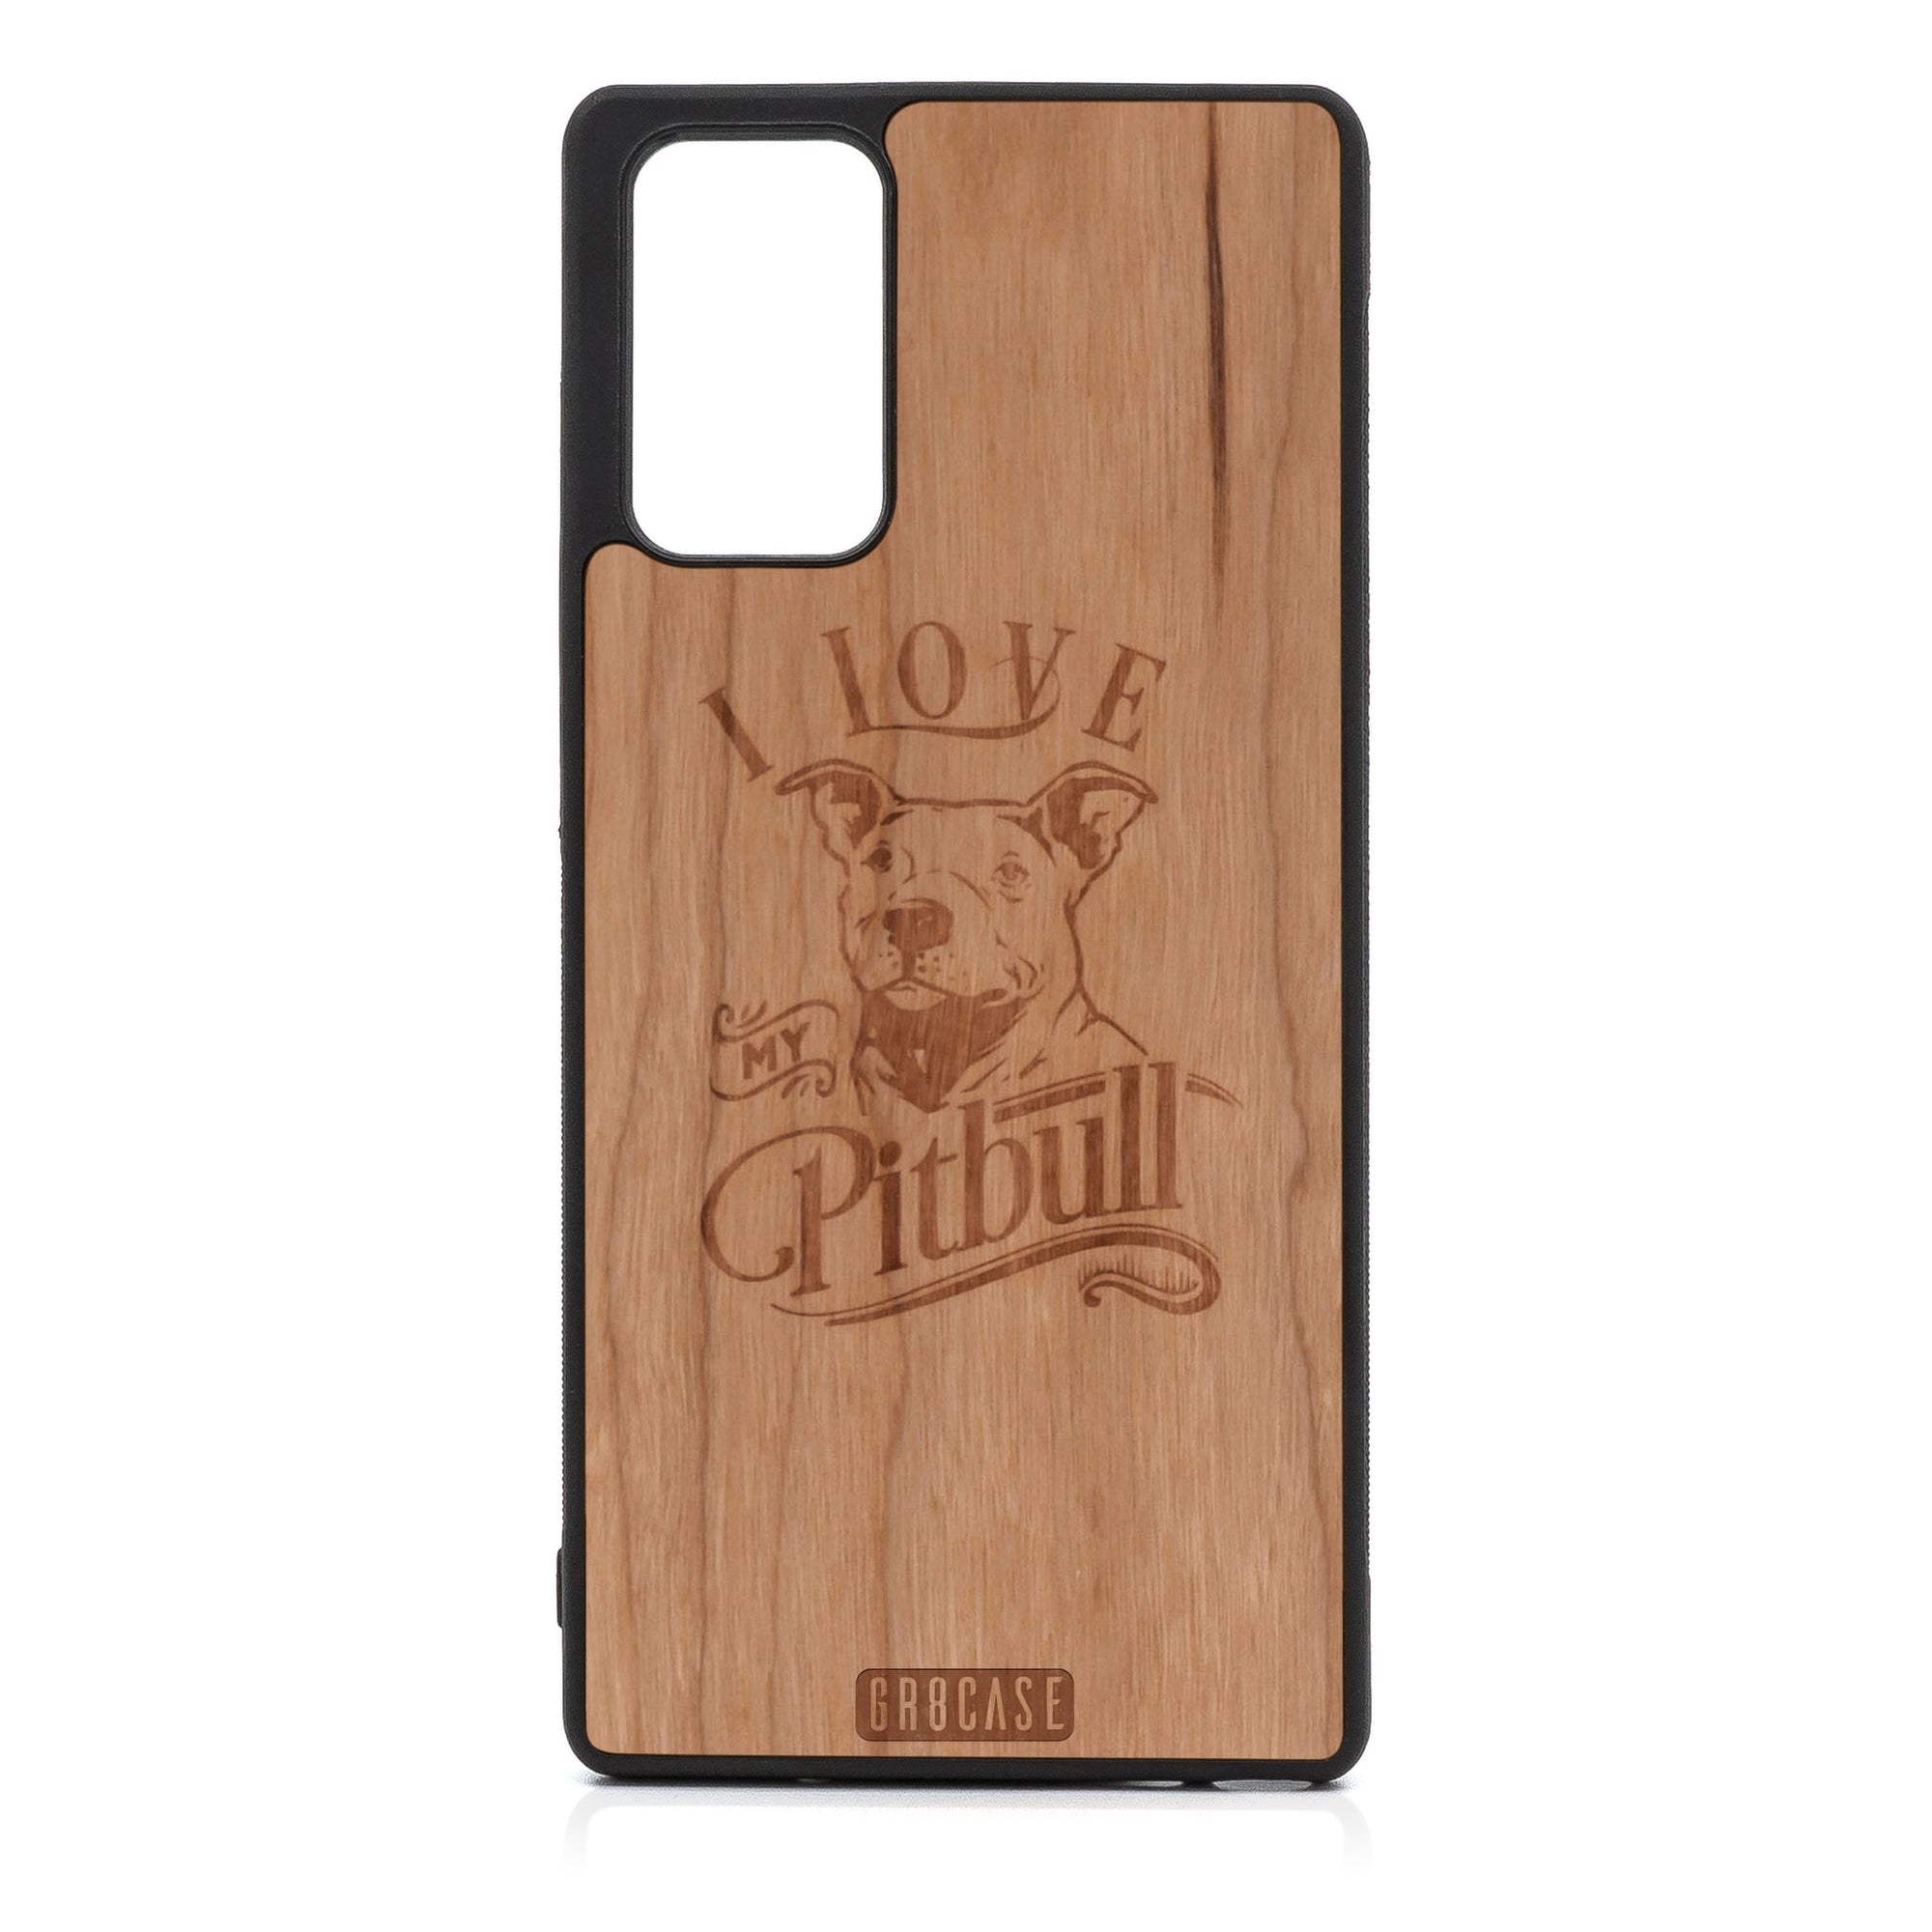 I Love My Pitbull Design Wood Case For Samsung Galaxy Note 20